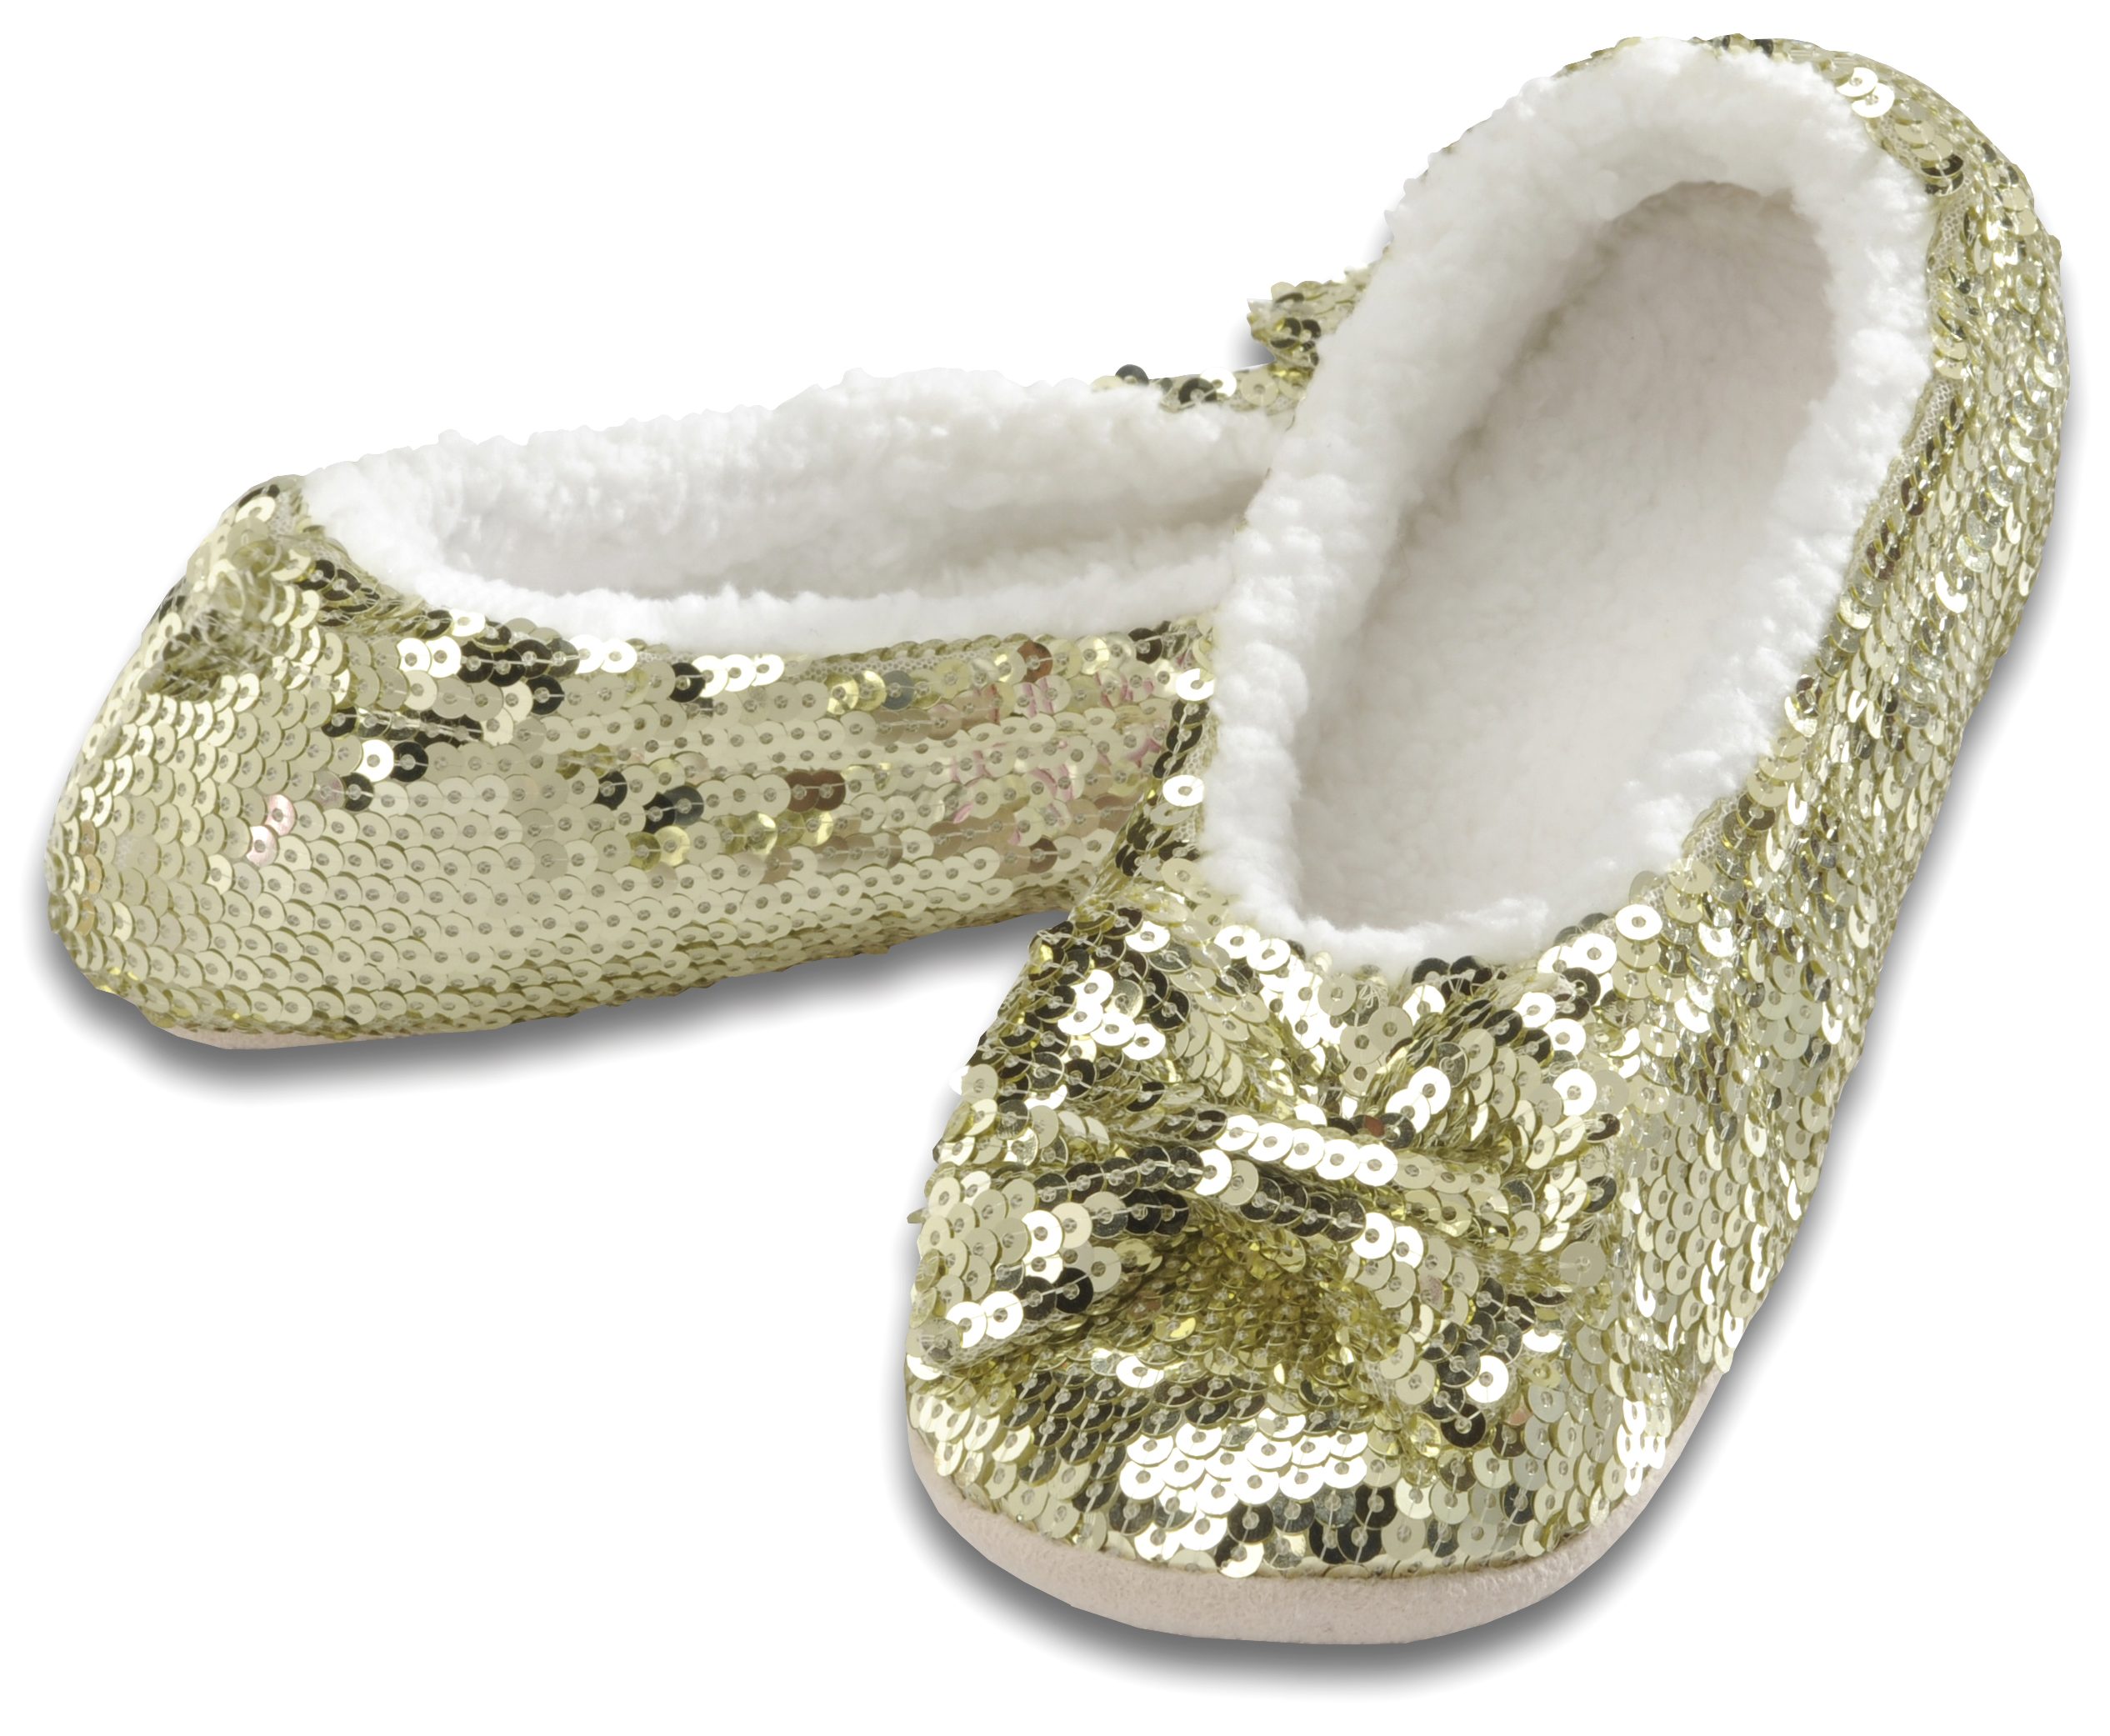 gold sequin slippers